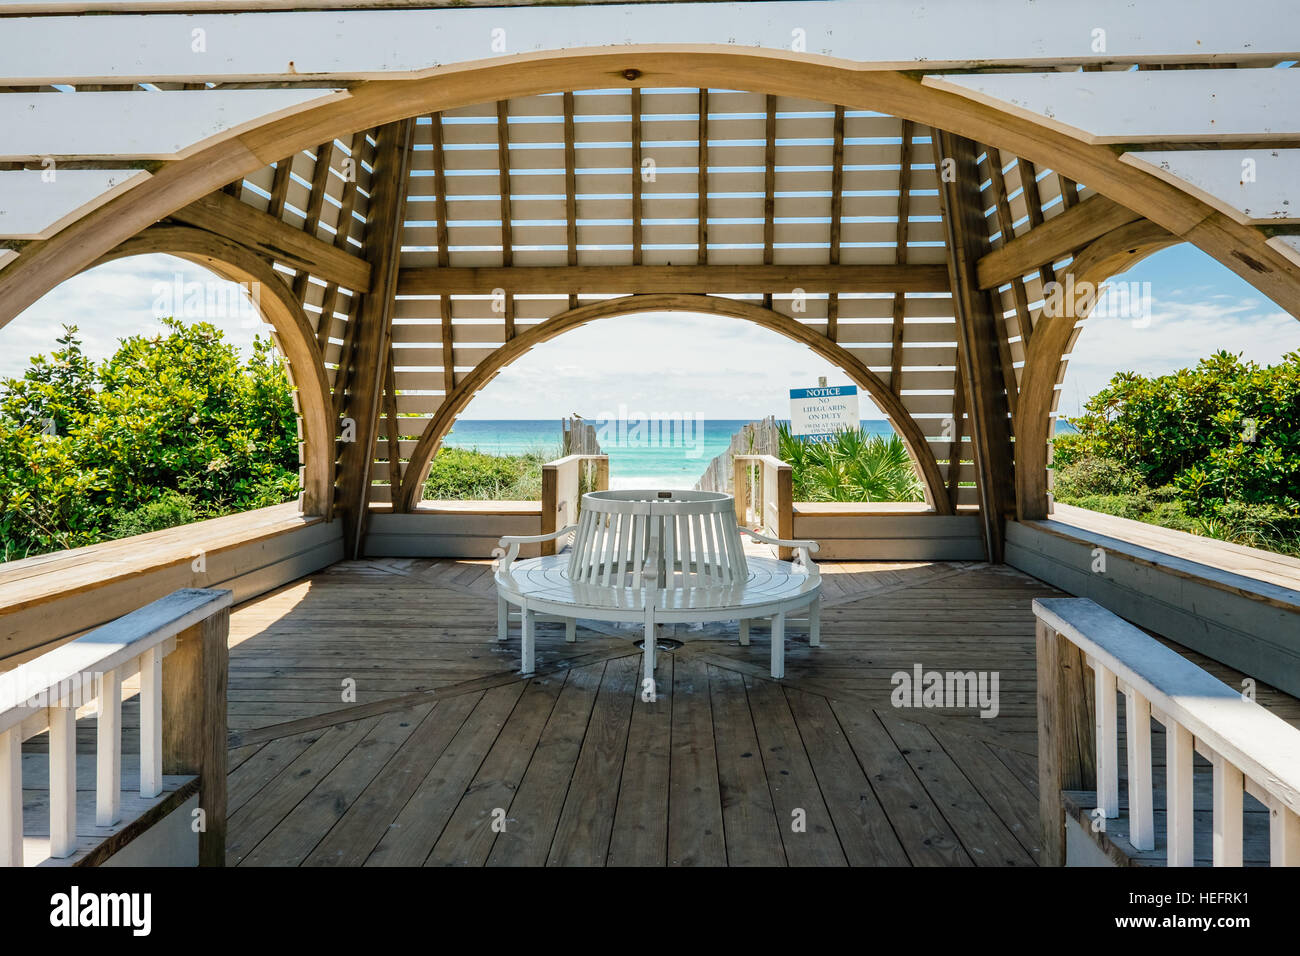 Beachside pavilion in Seaside Florida with white sand beach and clear blue Gulf of Mexico water in the background. Stock Photo